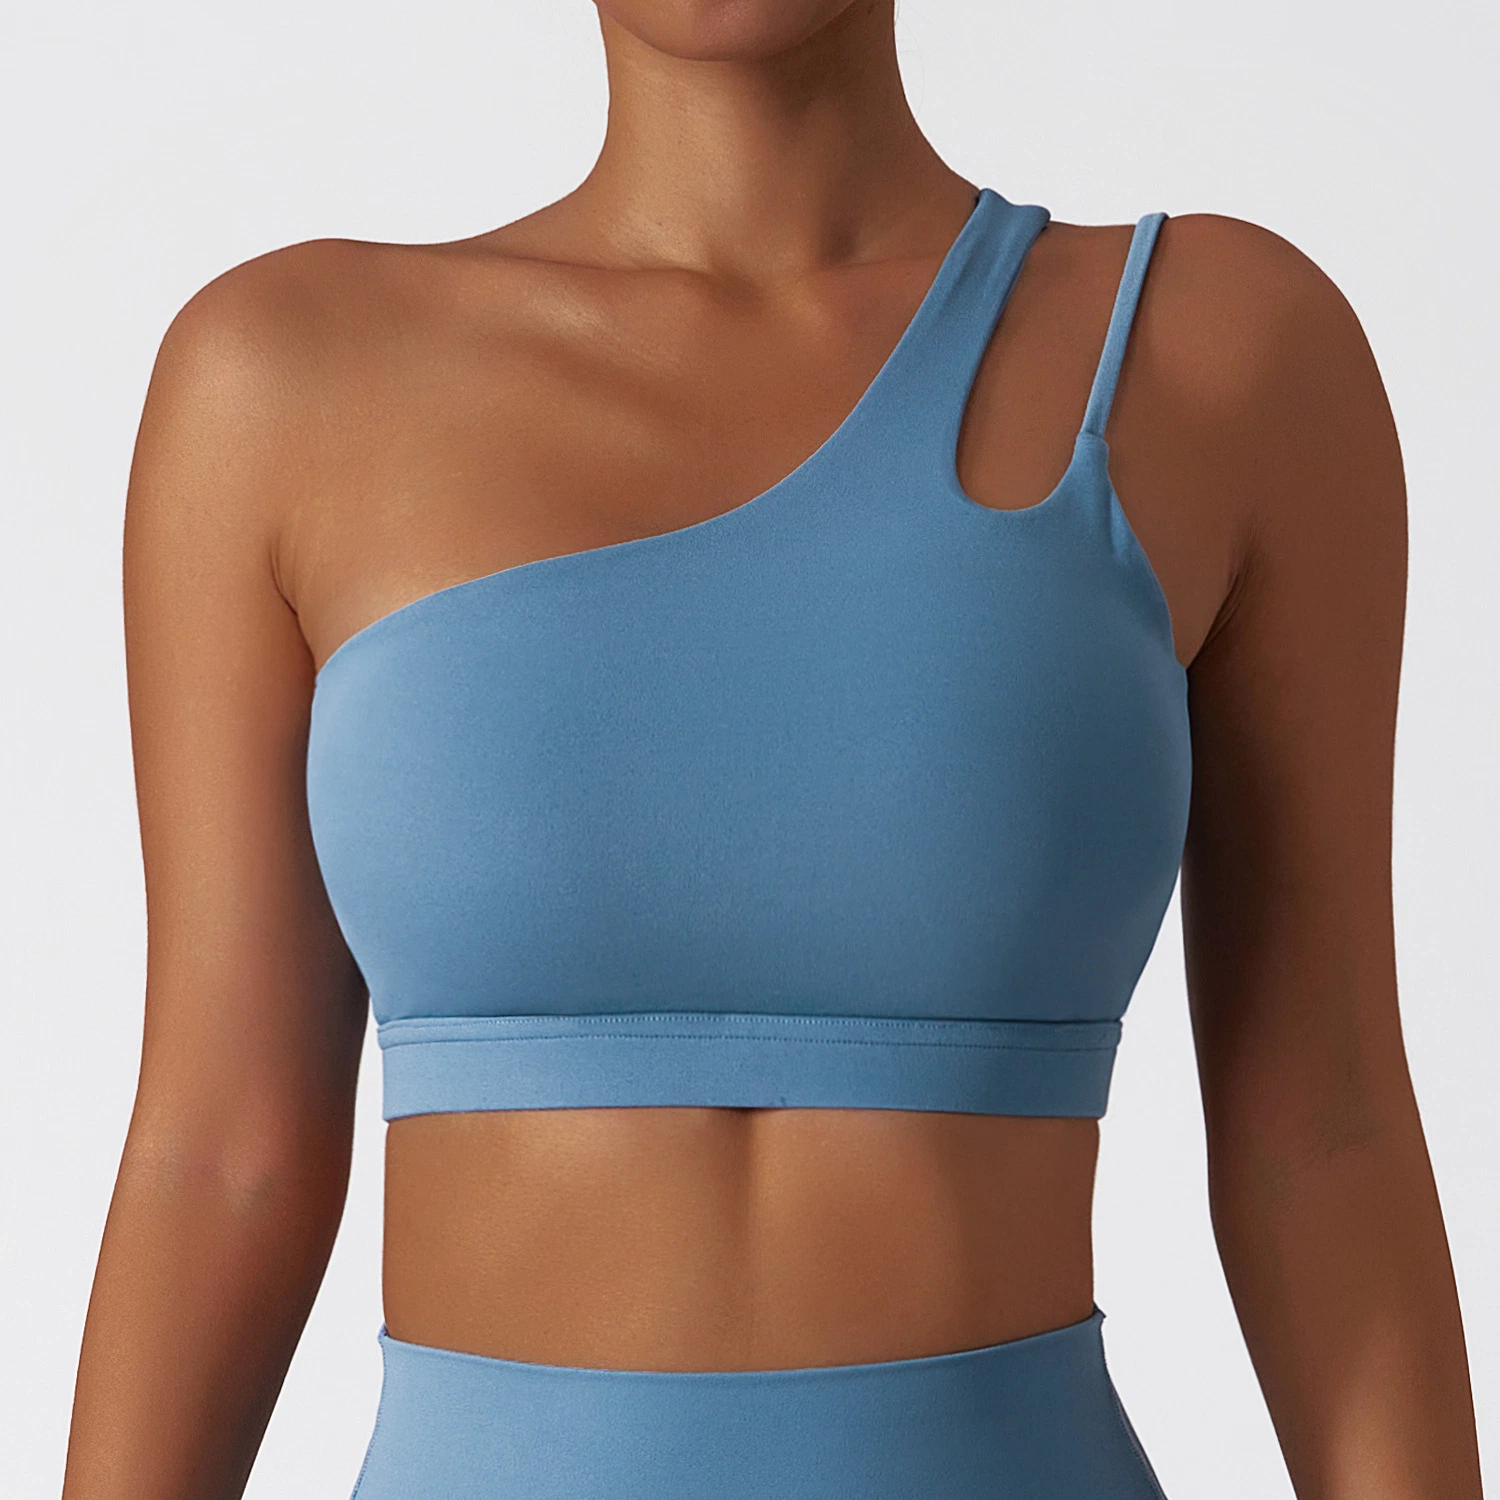 Wholesale/Supplier Quick Dry Workout Seamless Sports Top High Impact Yoga Tops Fitness Women Sports Bra